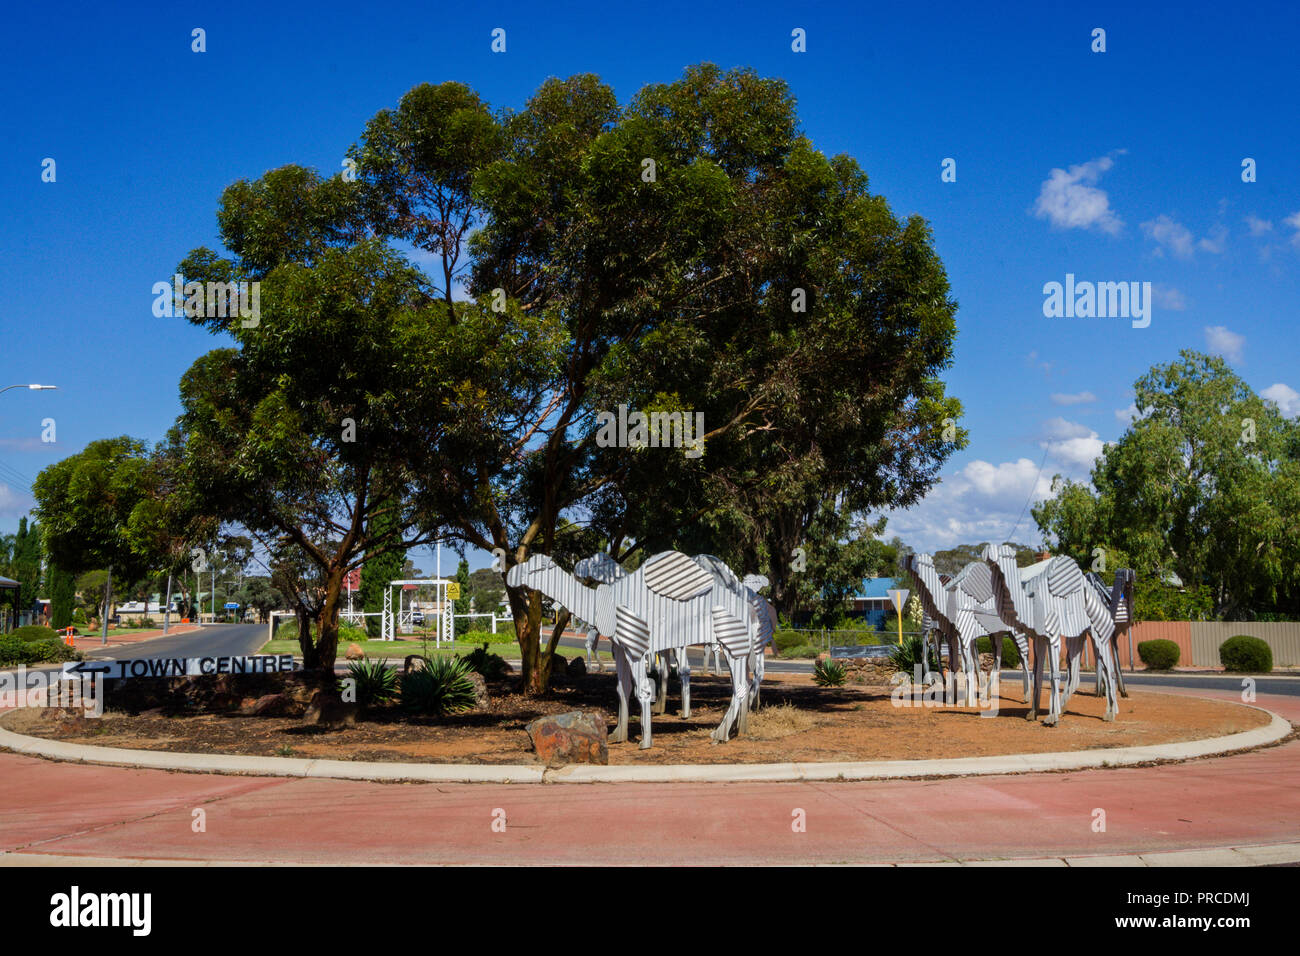 Corrugated iron sculptures of camels in the mining town of Norseman in Western Australia at the western gateway to the Nullabor Plain Stock Photo